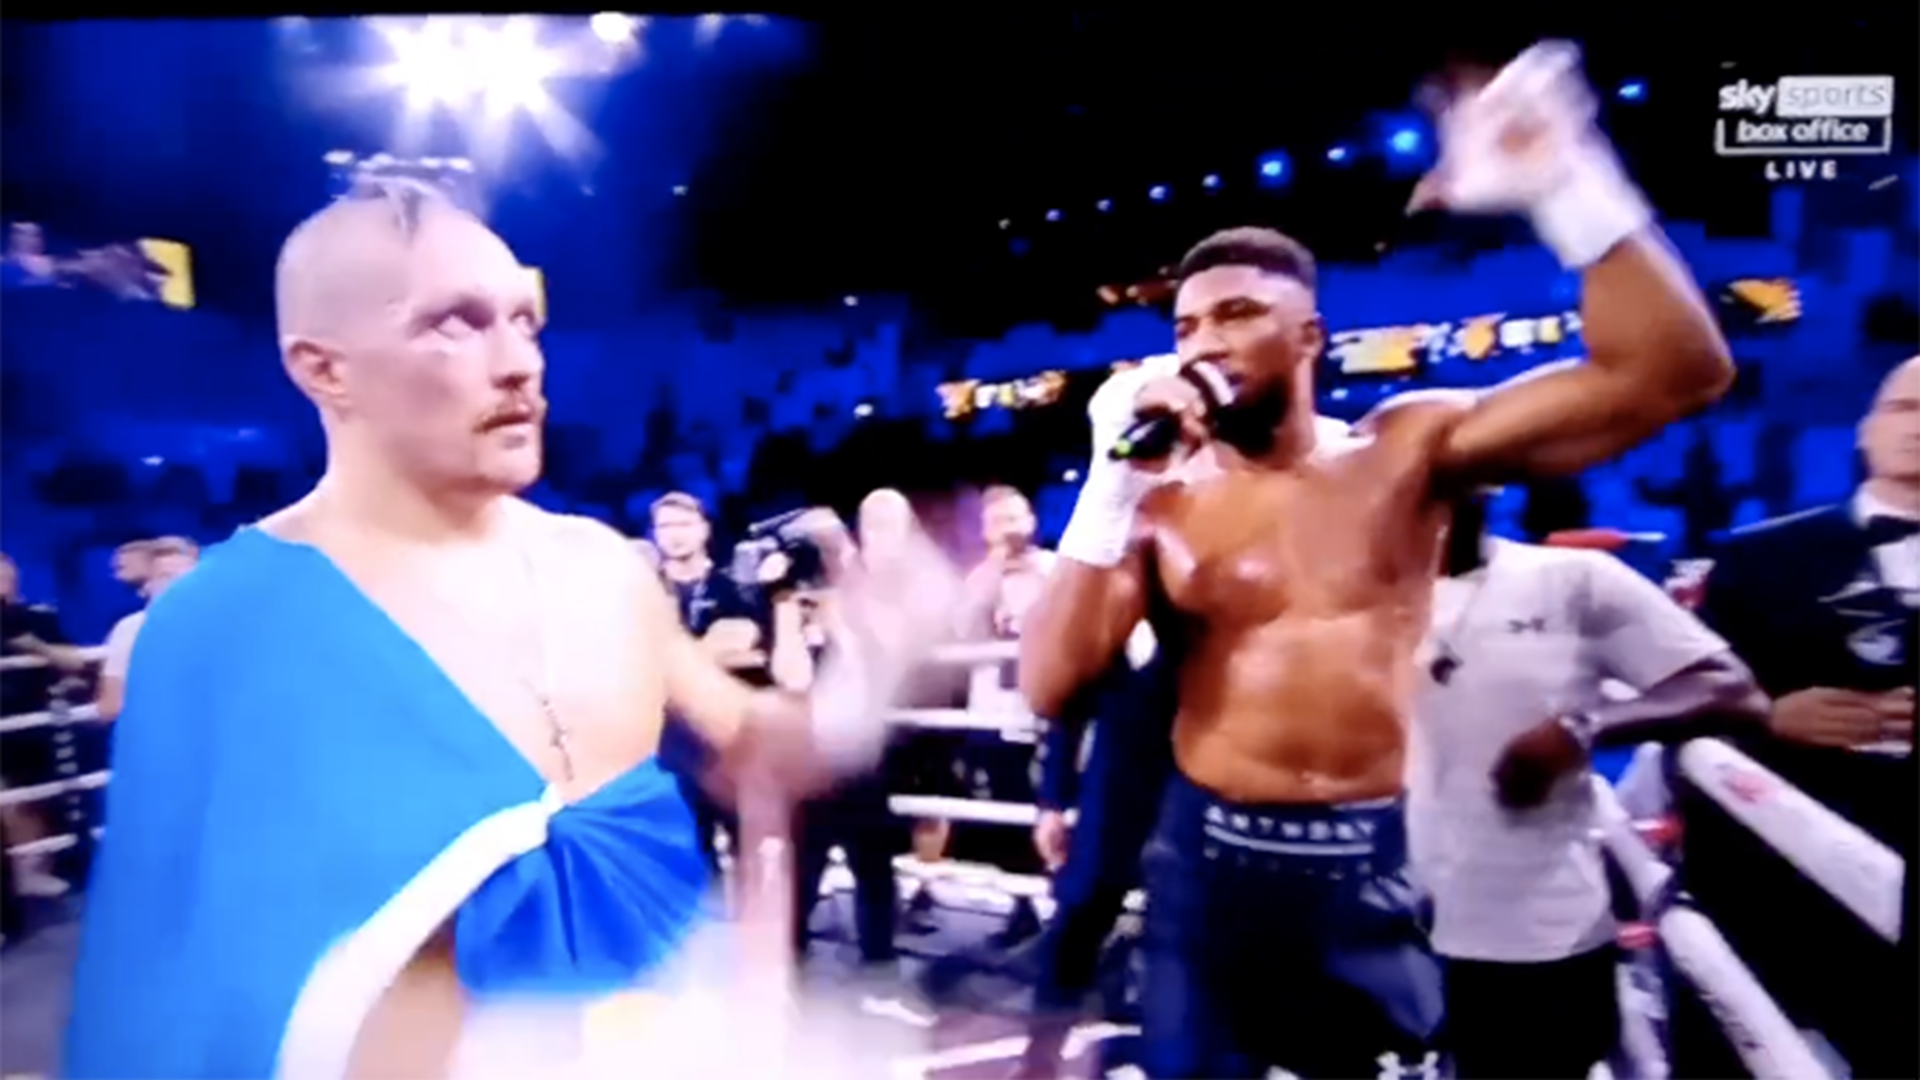 Watch Anthony Joshua throw belts out of ring and praise Oleksandr Usyk in bizarre post-fight speech in Saudi Arabia